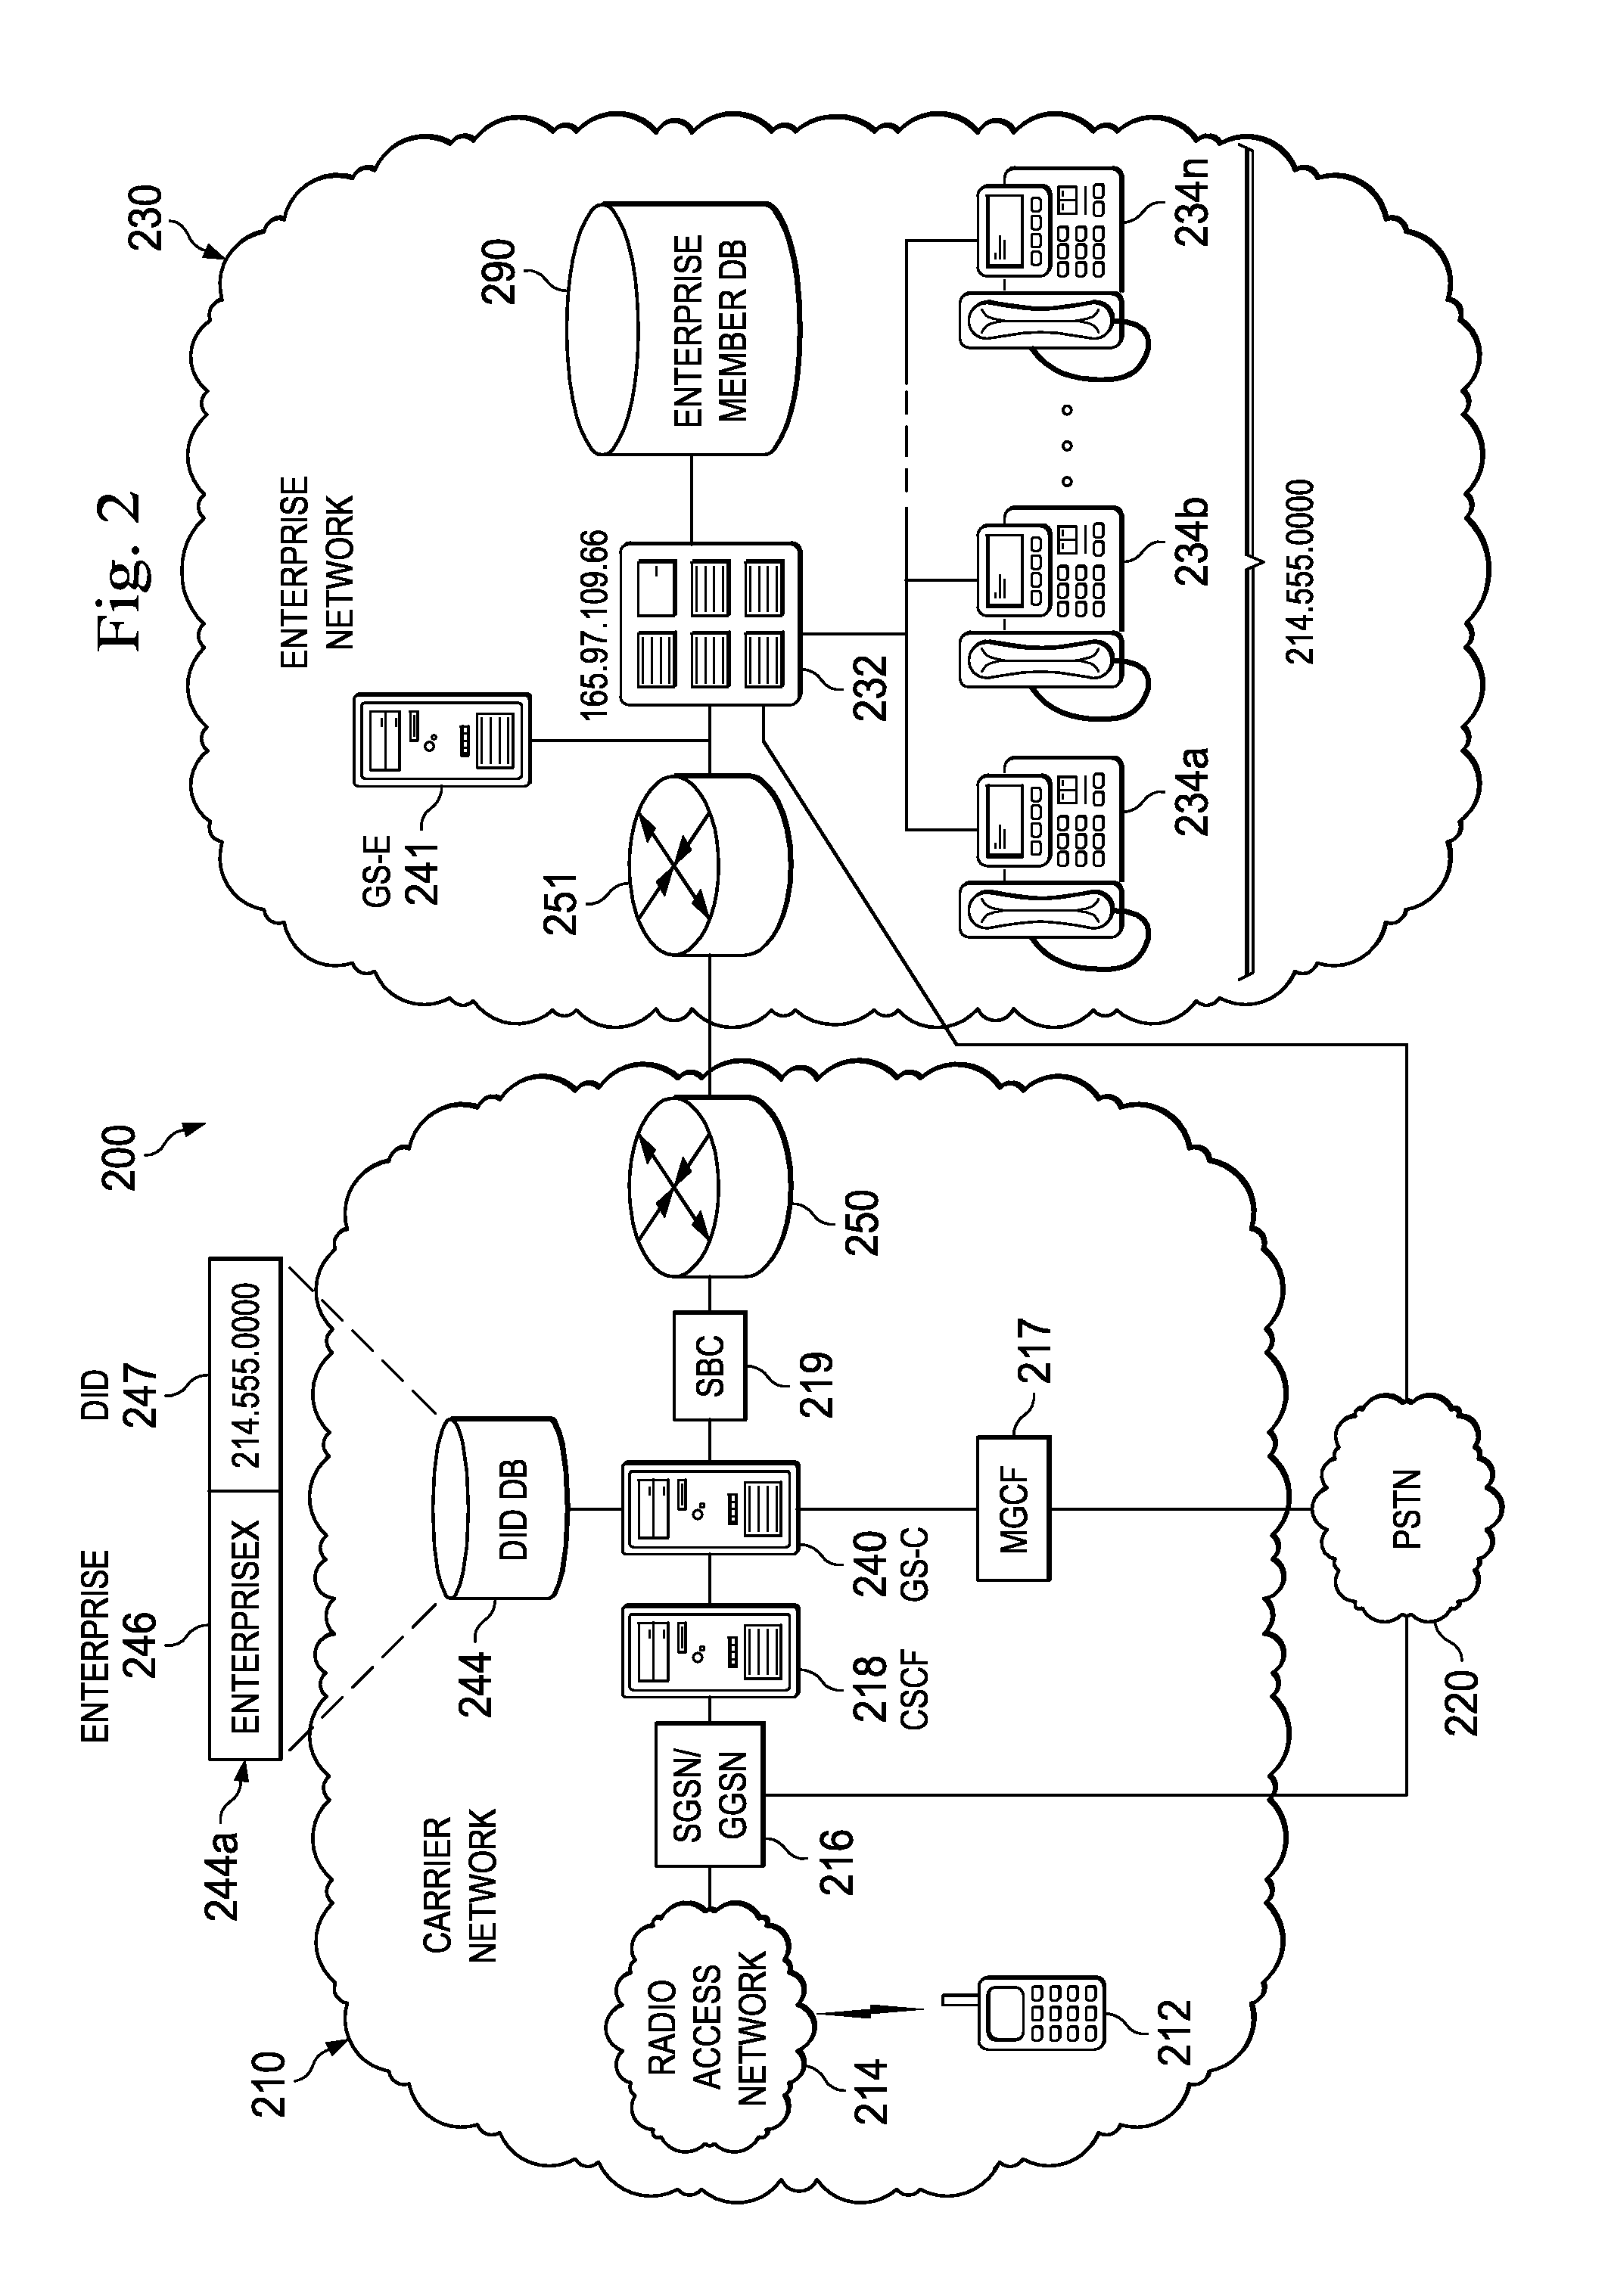 System, method, and computer-readable medium for by-passing the public switched telephone network when interconnecting an enterprise network and a carrier network